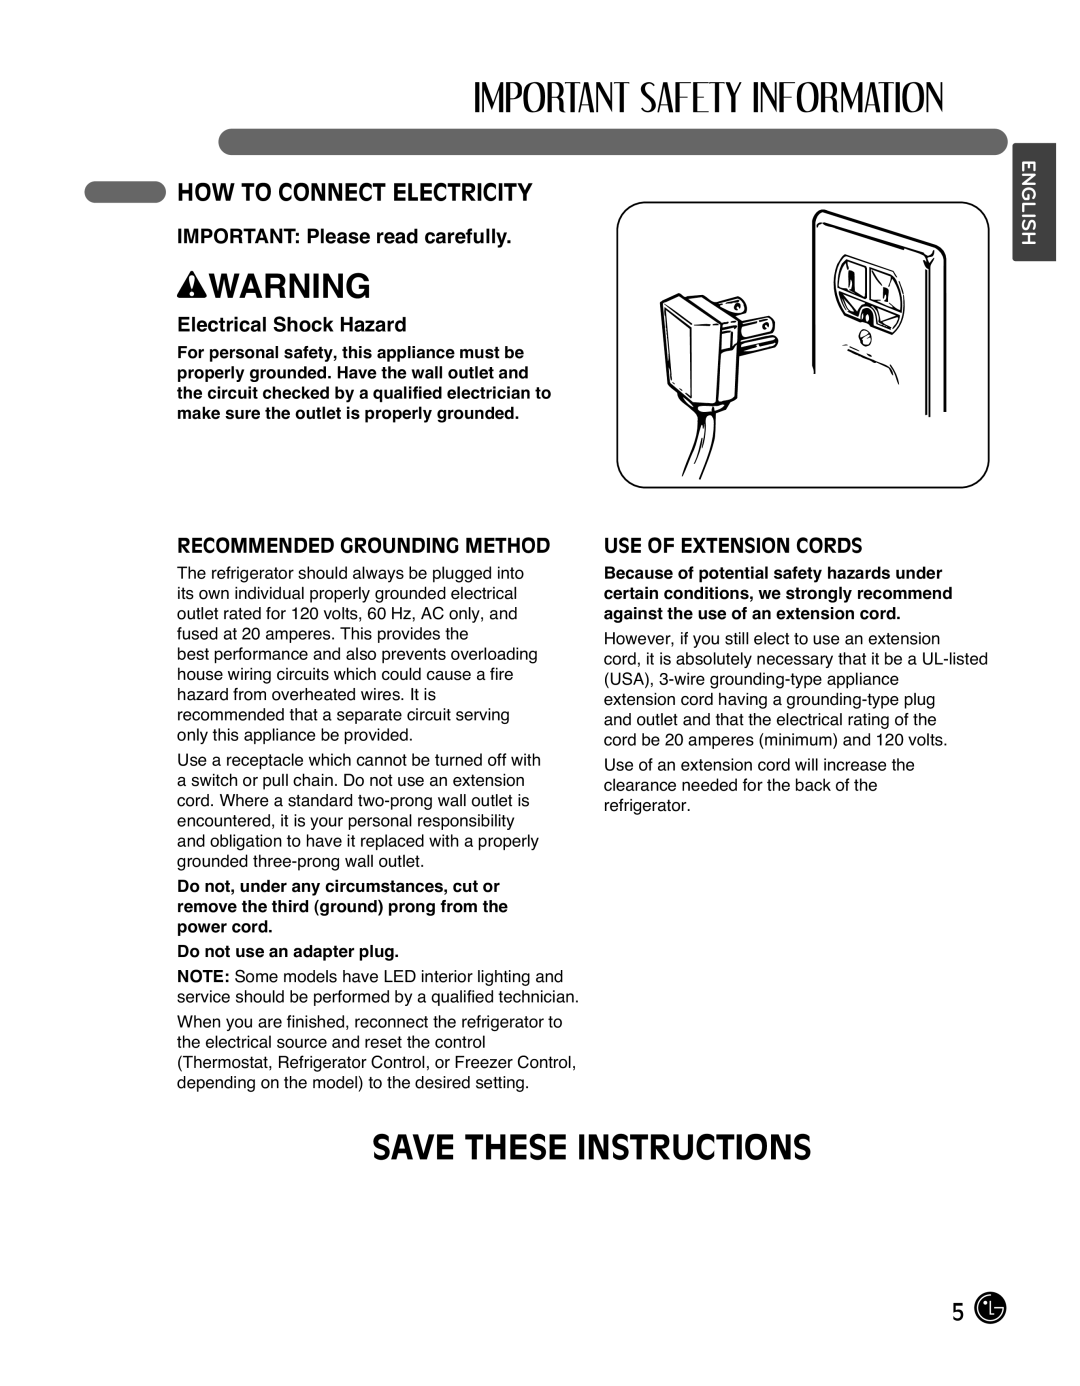 LG Electronics LMX25988ST Save These Instructions, How To Connect Electricity, IMPORTANT Please read carefully, wWARNING 